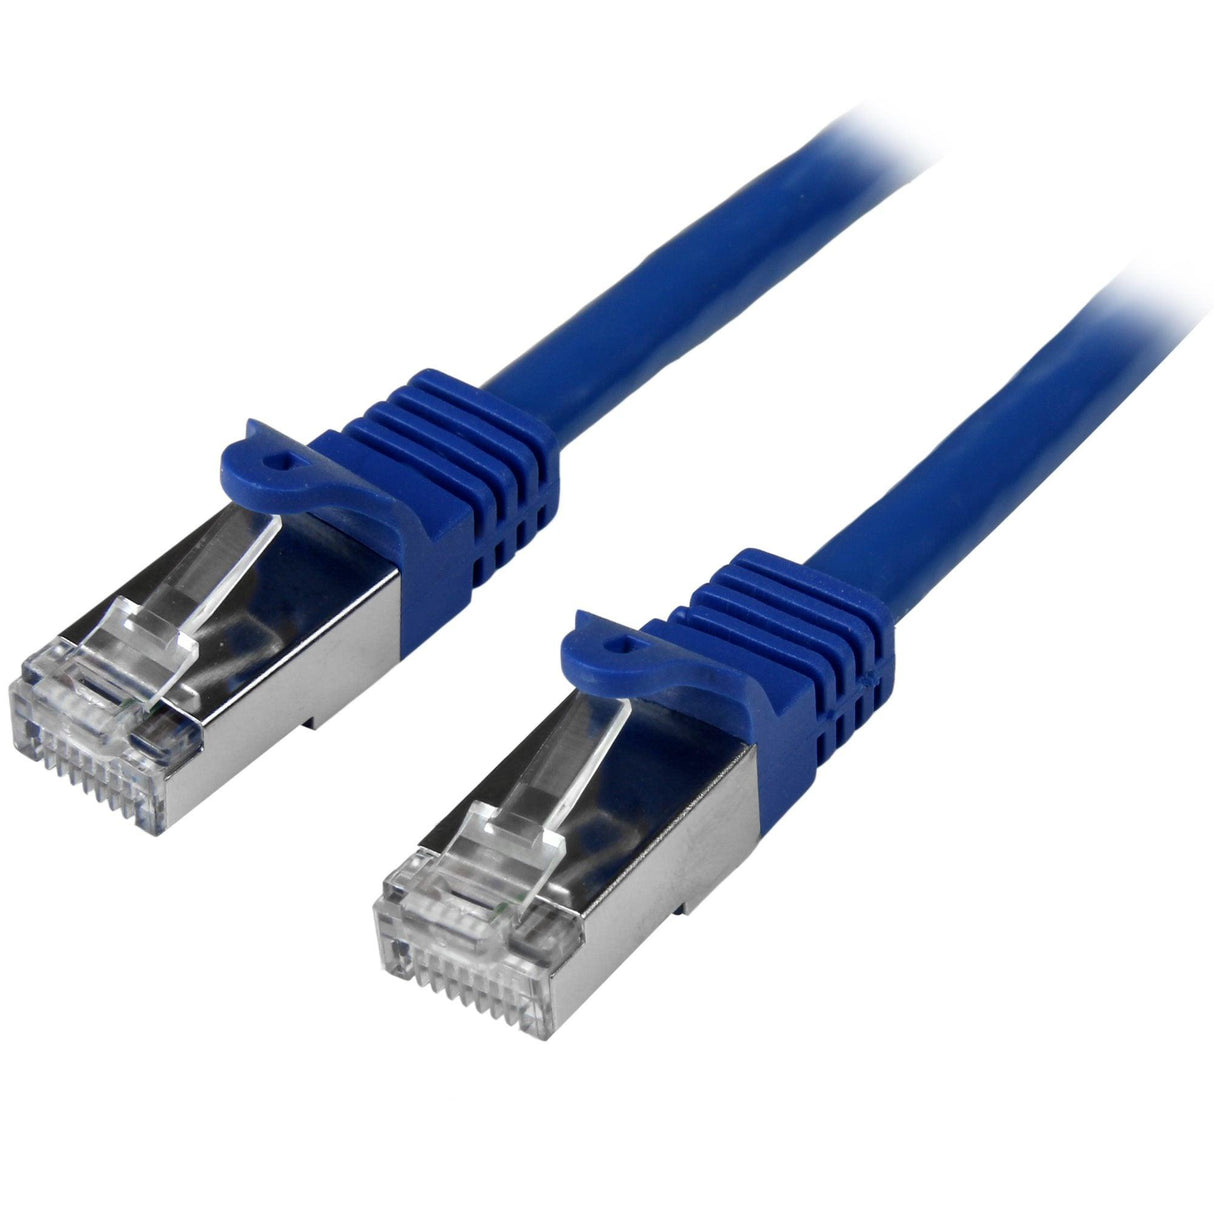 STARTECH 2m Cat6 Patch Cable - Shielded (SFTP) Snagless Gigabit Network Patch Cable - Blue Cat 6 Ethernet Patch Lead (N6SPAT2MBL) (N6SPAT2MBL)